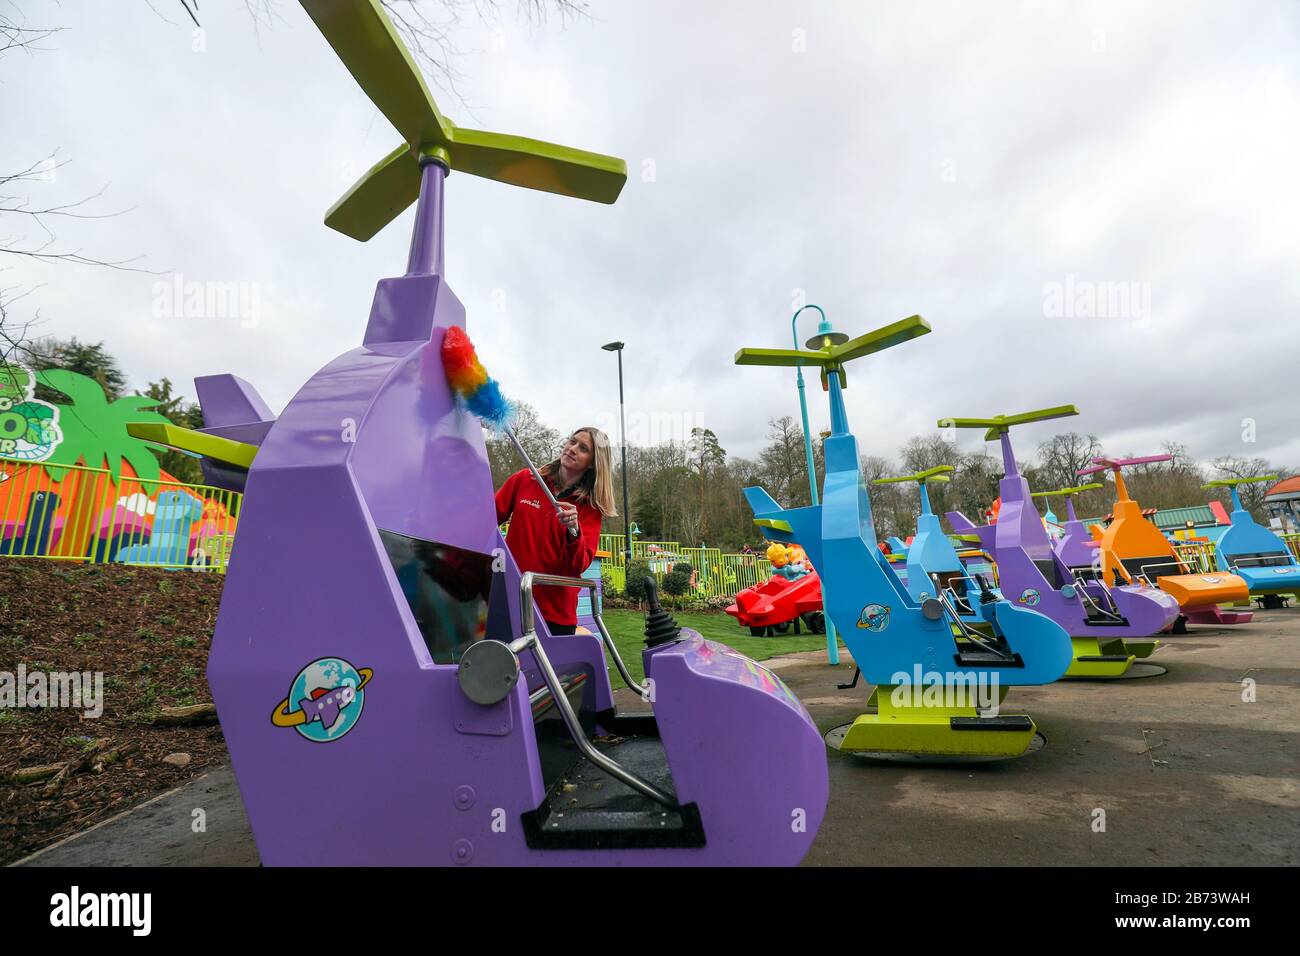 LEGOLAND Windsor team member Laura cleans the DUPLO Valley airport at LEGOLAND Windsor Resort, Berkshire, as part of a makeover of the bigger and better DUPLO Valley land which opens to the public on Saturday 14 March. Stock Photo